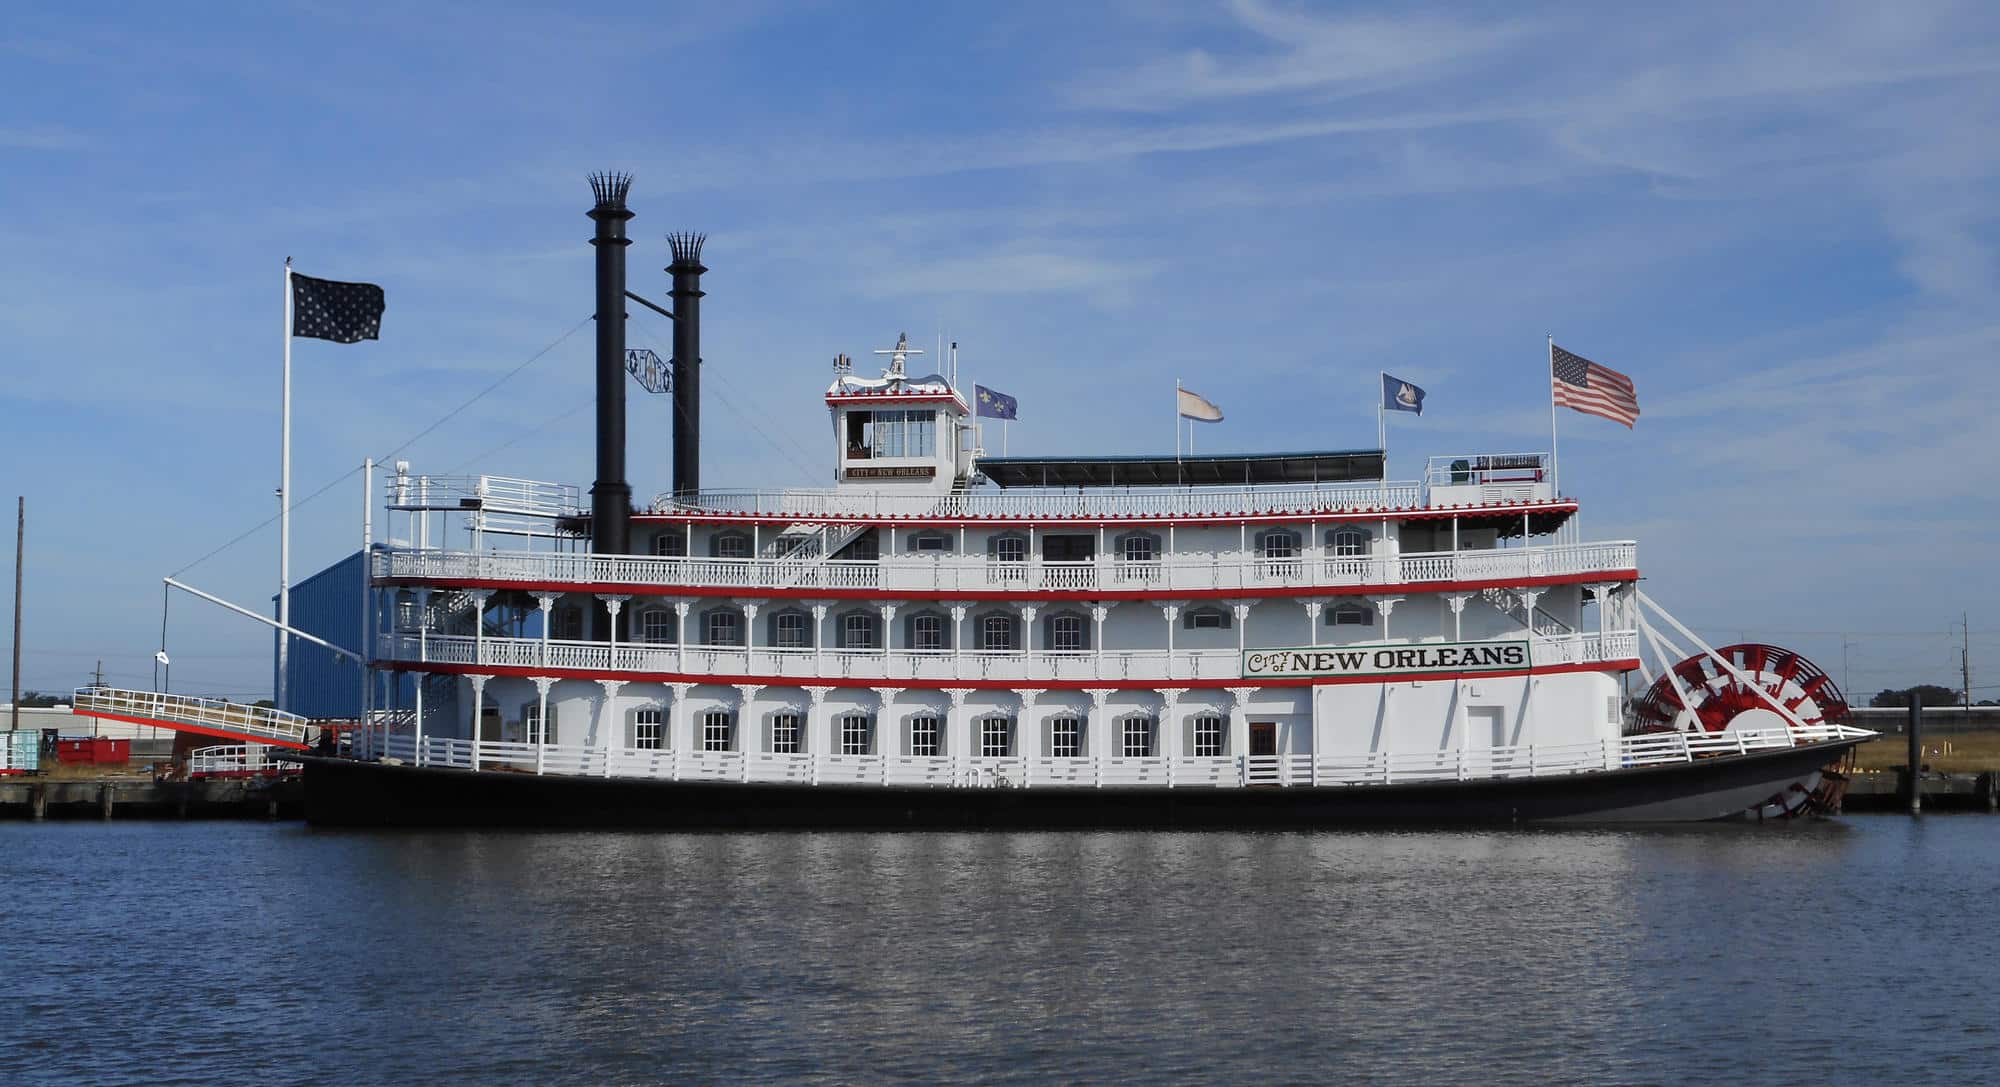 Riverboat City of New Orleans